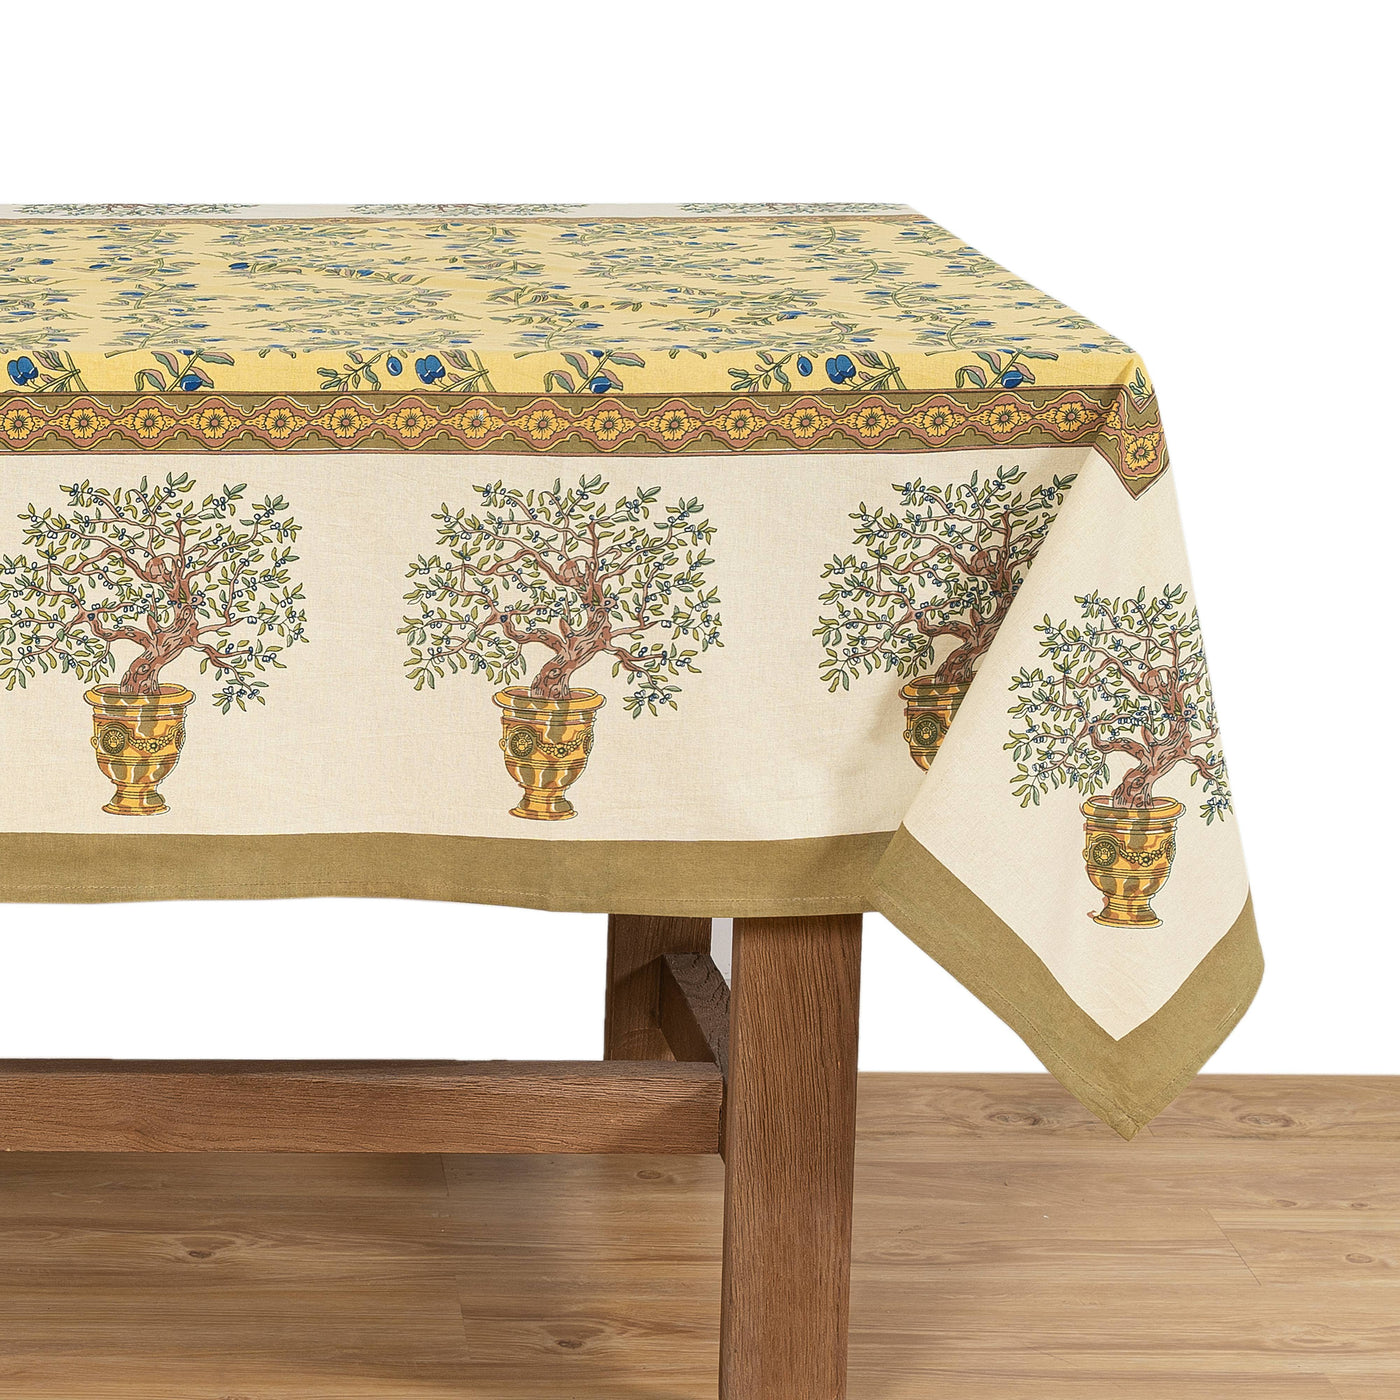 French Tablecloth Olive Tree